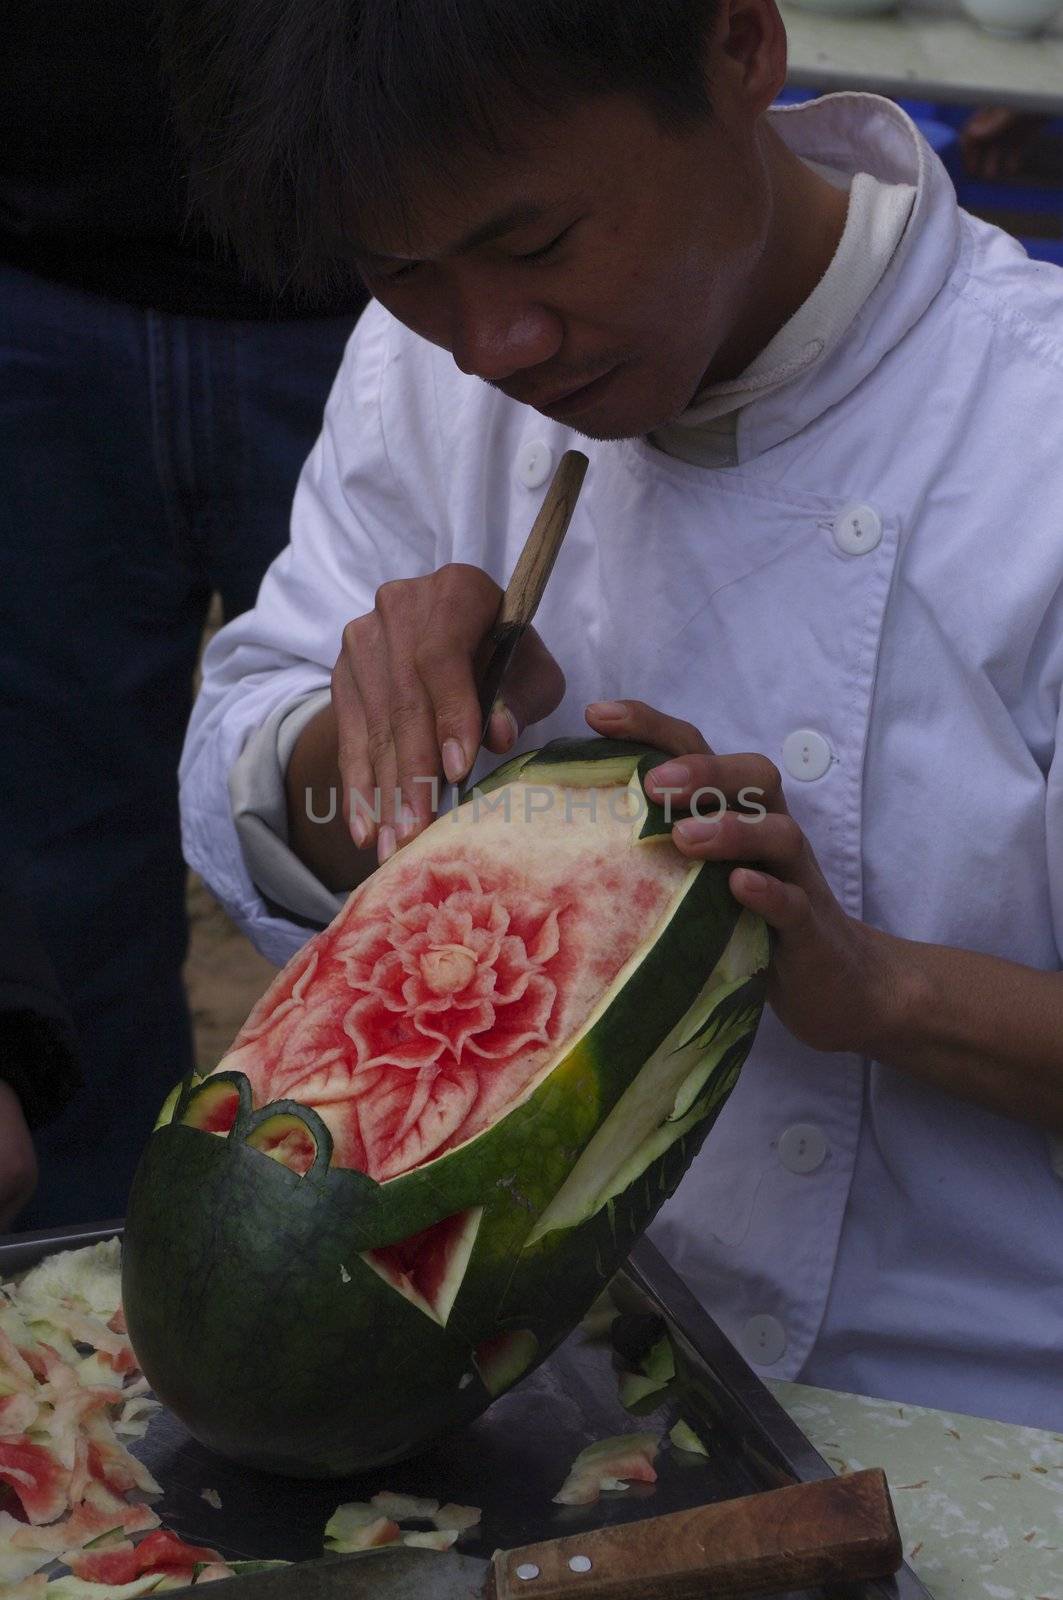 Asians are good makers of miniatures and decorations. With this single knife carve the watermelon man. It's beautiful!